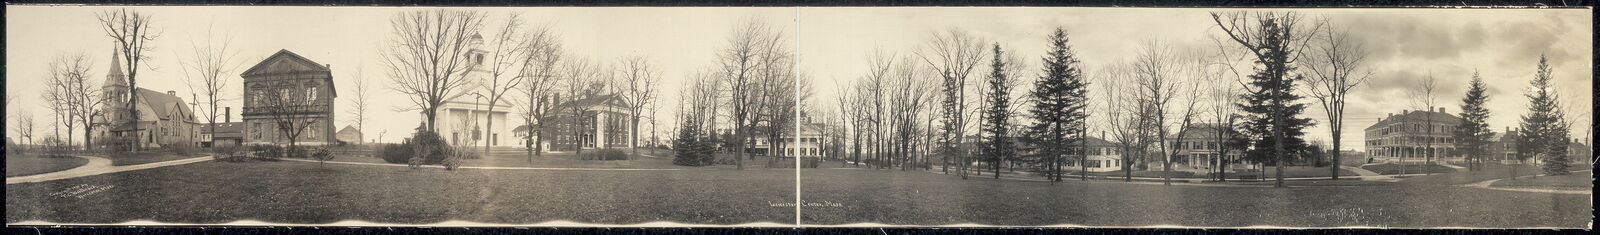 Photo:1910 Panoramic: Leicester Center,Wecester County,Massachusetts